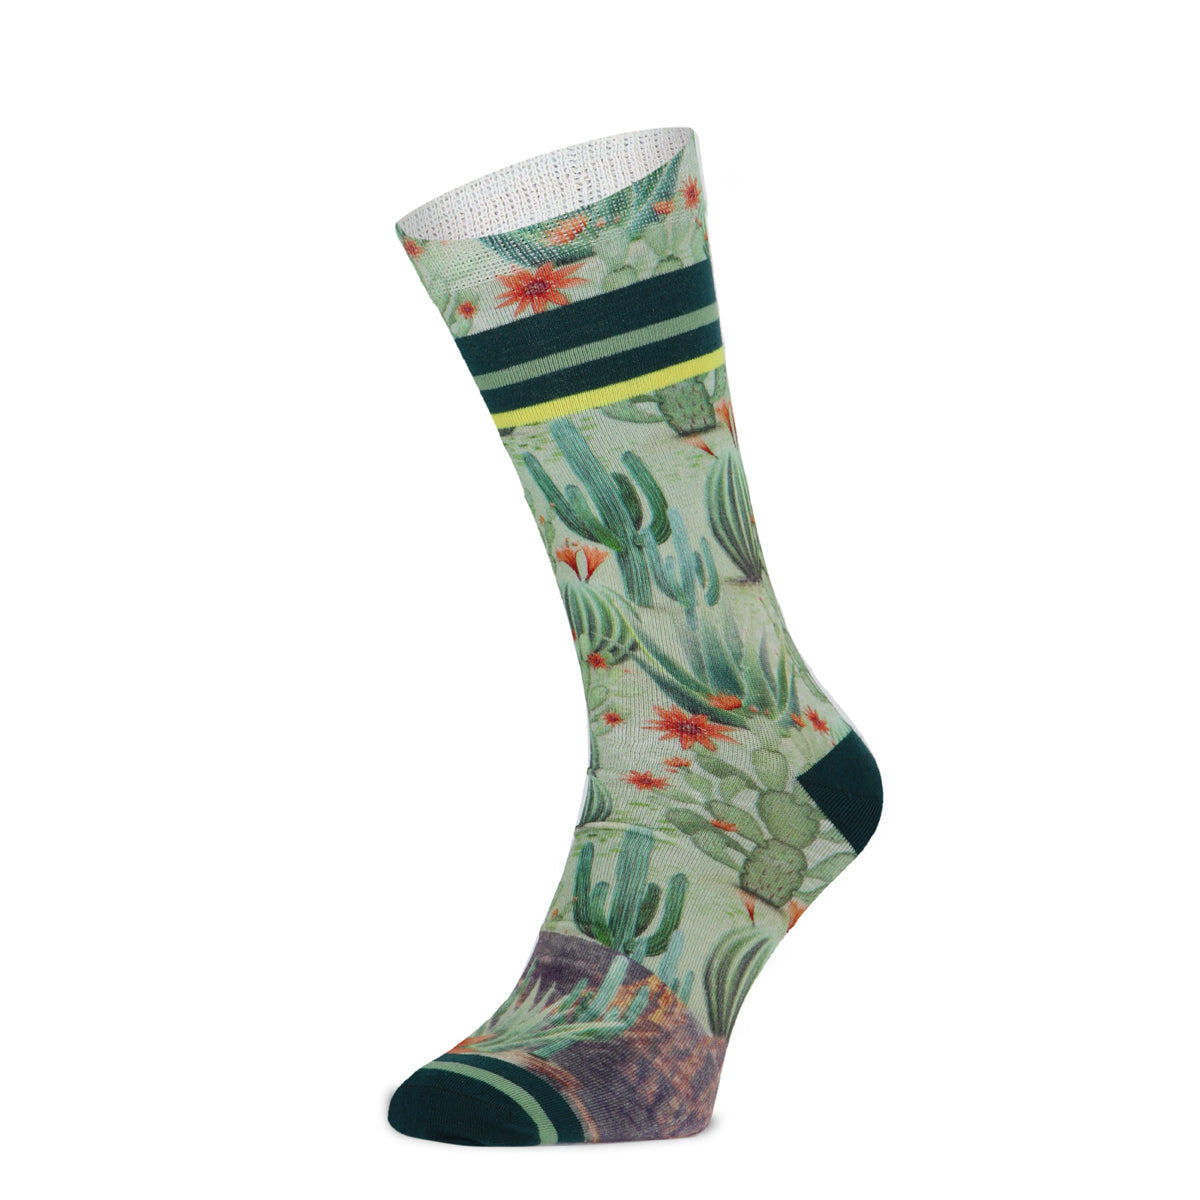 Xpooos & ADNF Cactus Bamboo Men's chaussettes pour hommes